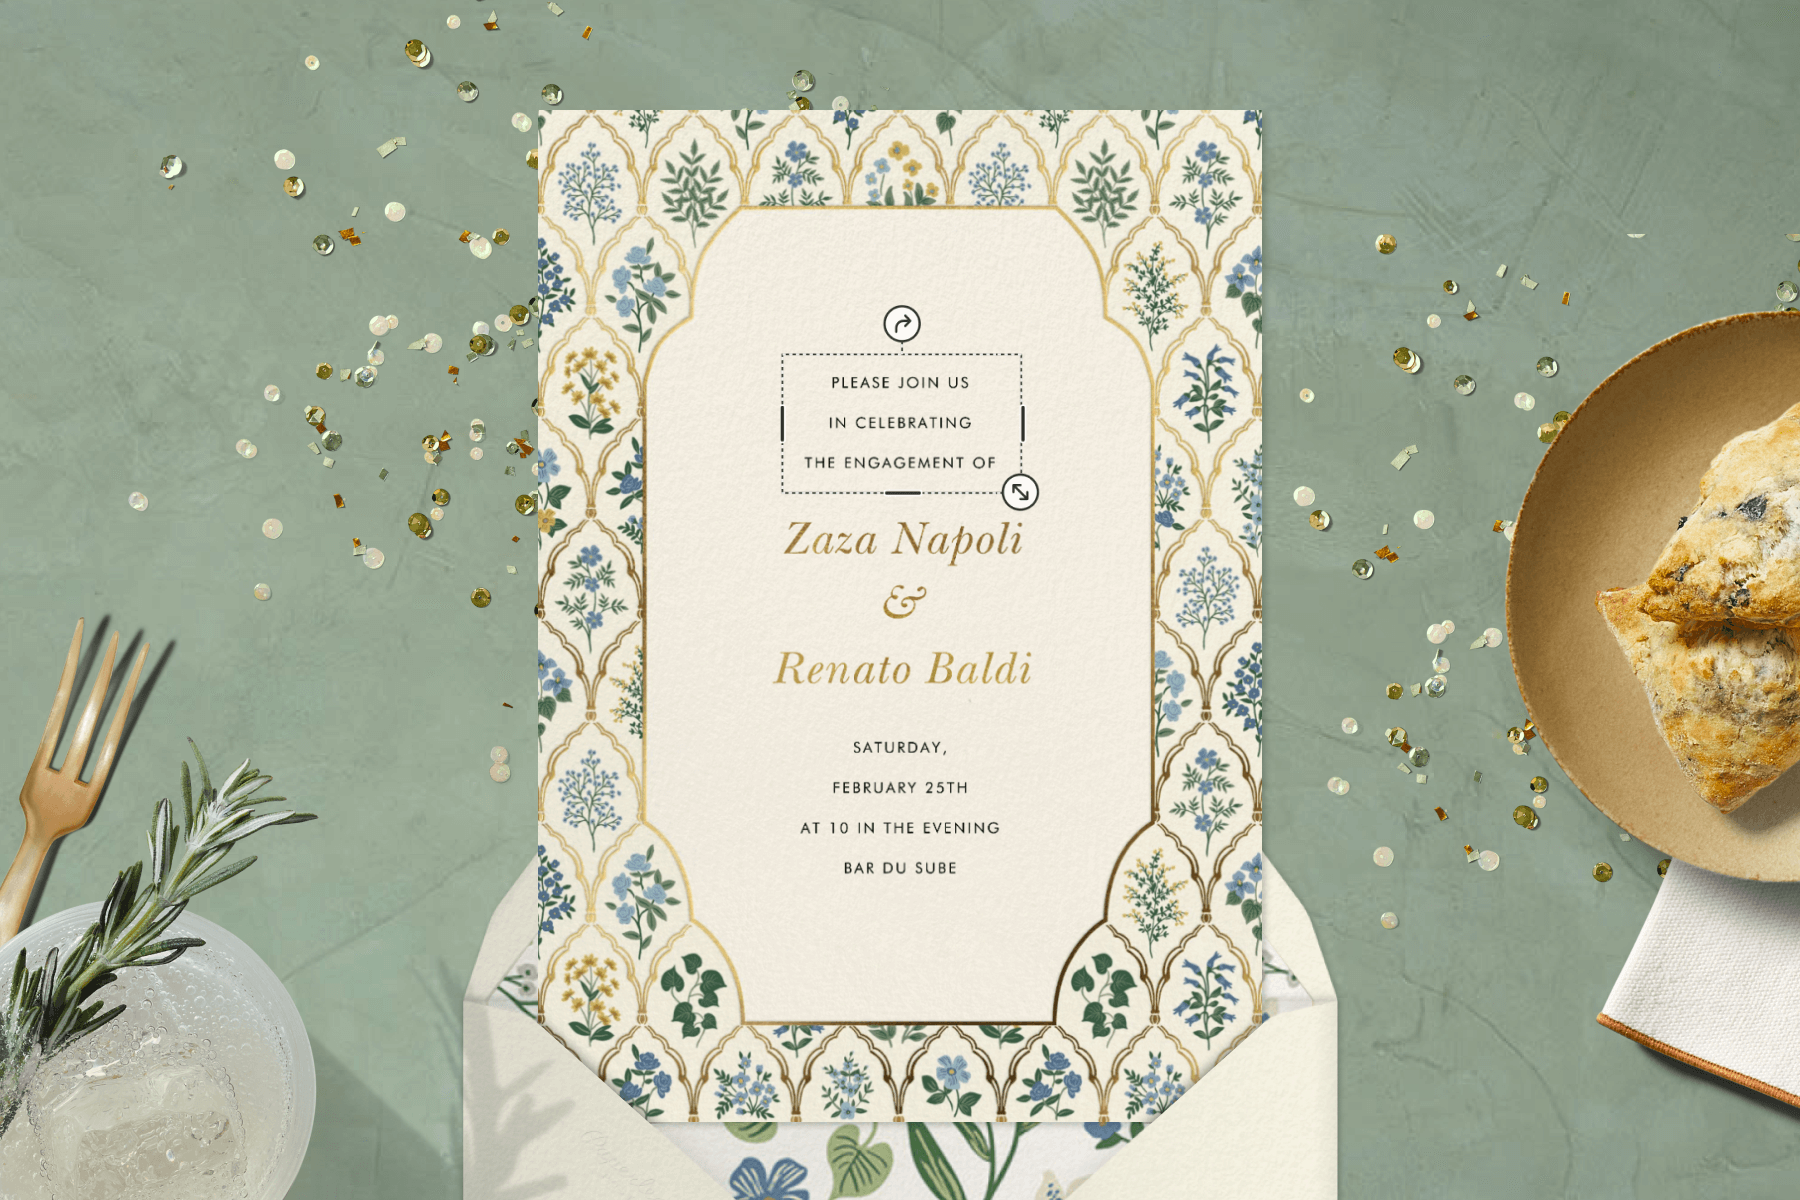 A floral engagement party invitation with props like a plate of scones and a drink.